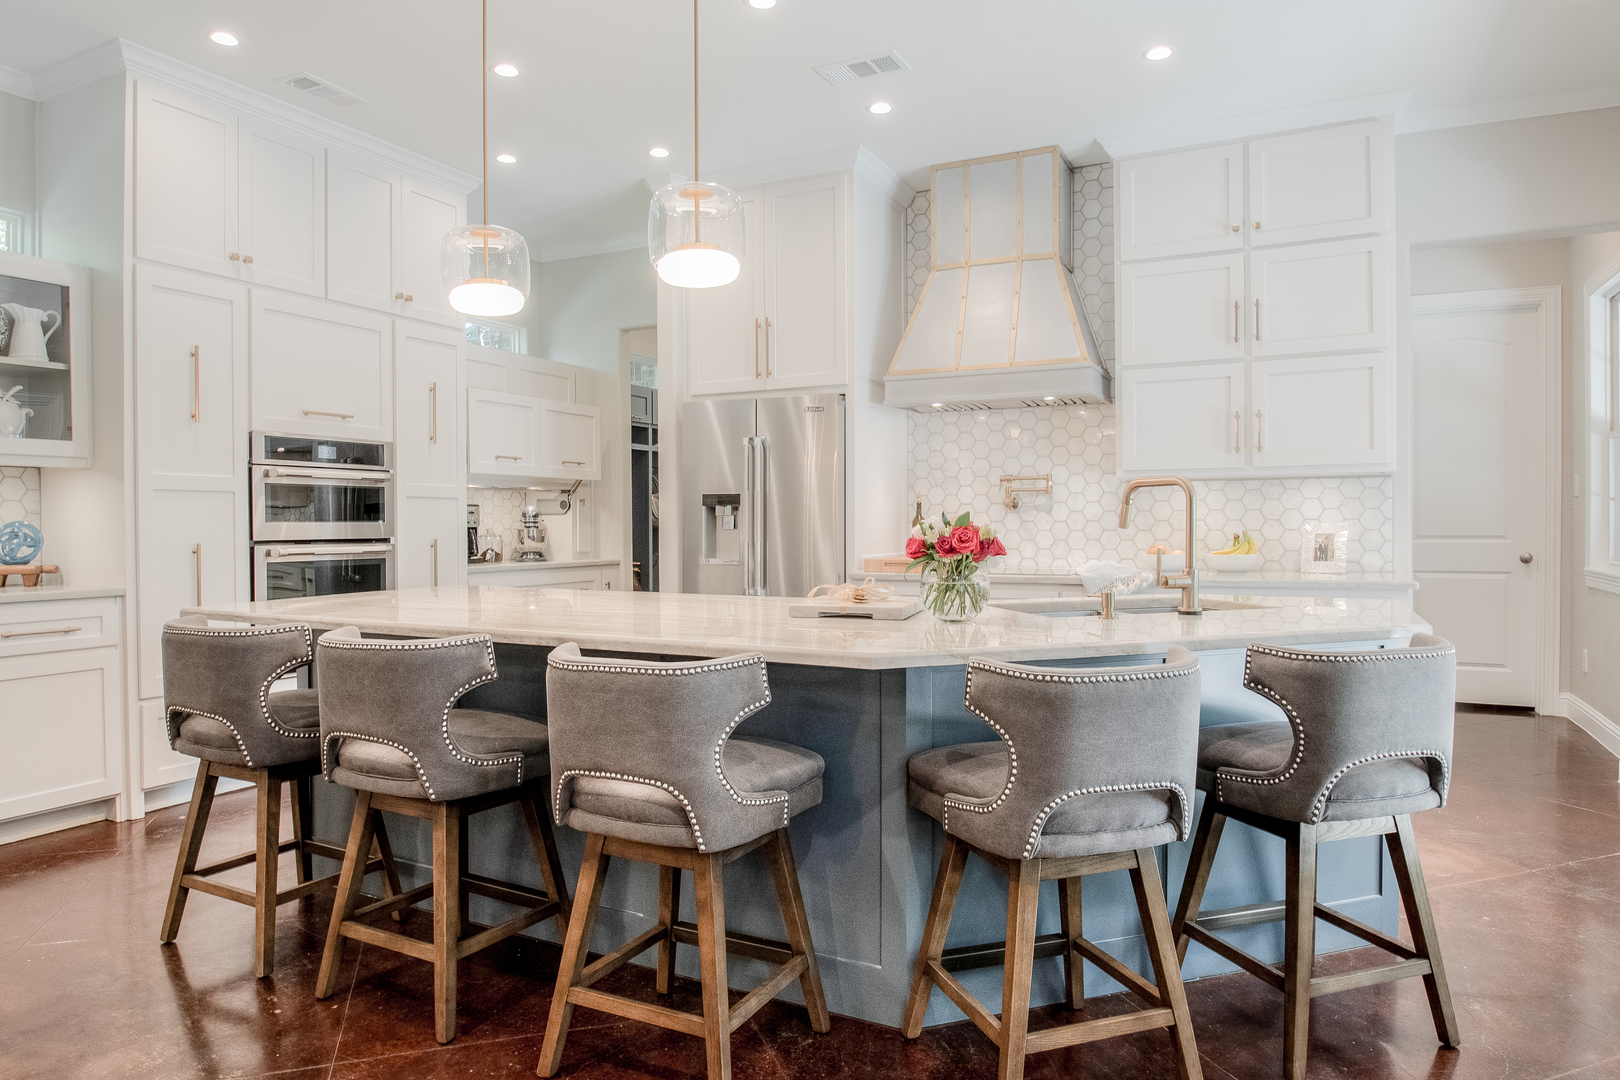 Incorporate kitchen design featuring with range hood white kitchen cabinets,marble kitchen countertops with marble backsplash